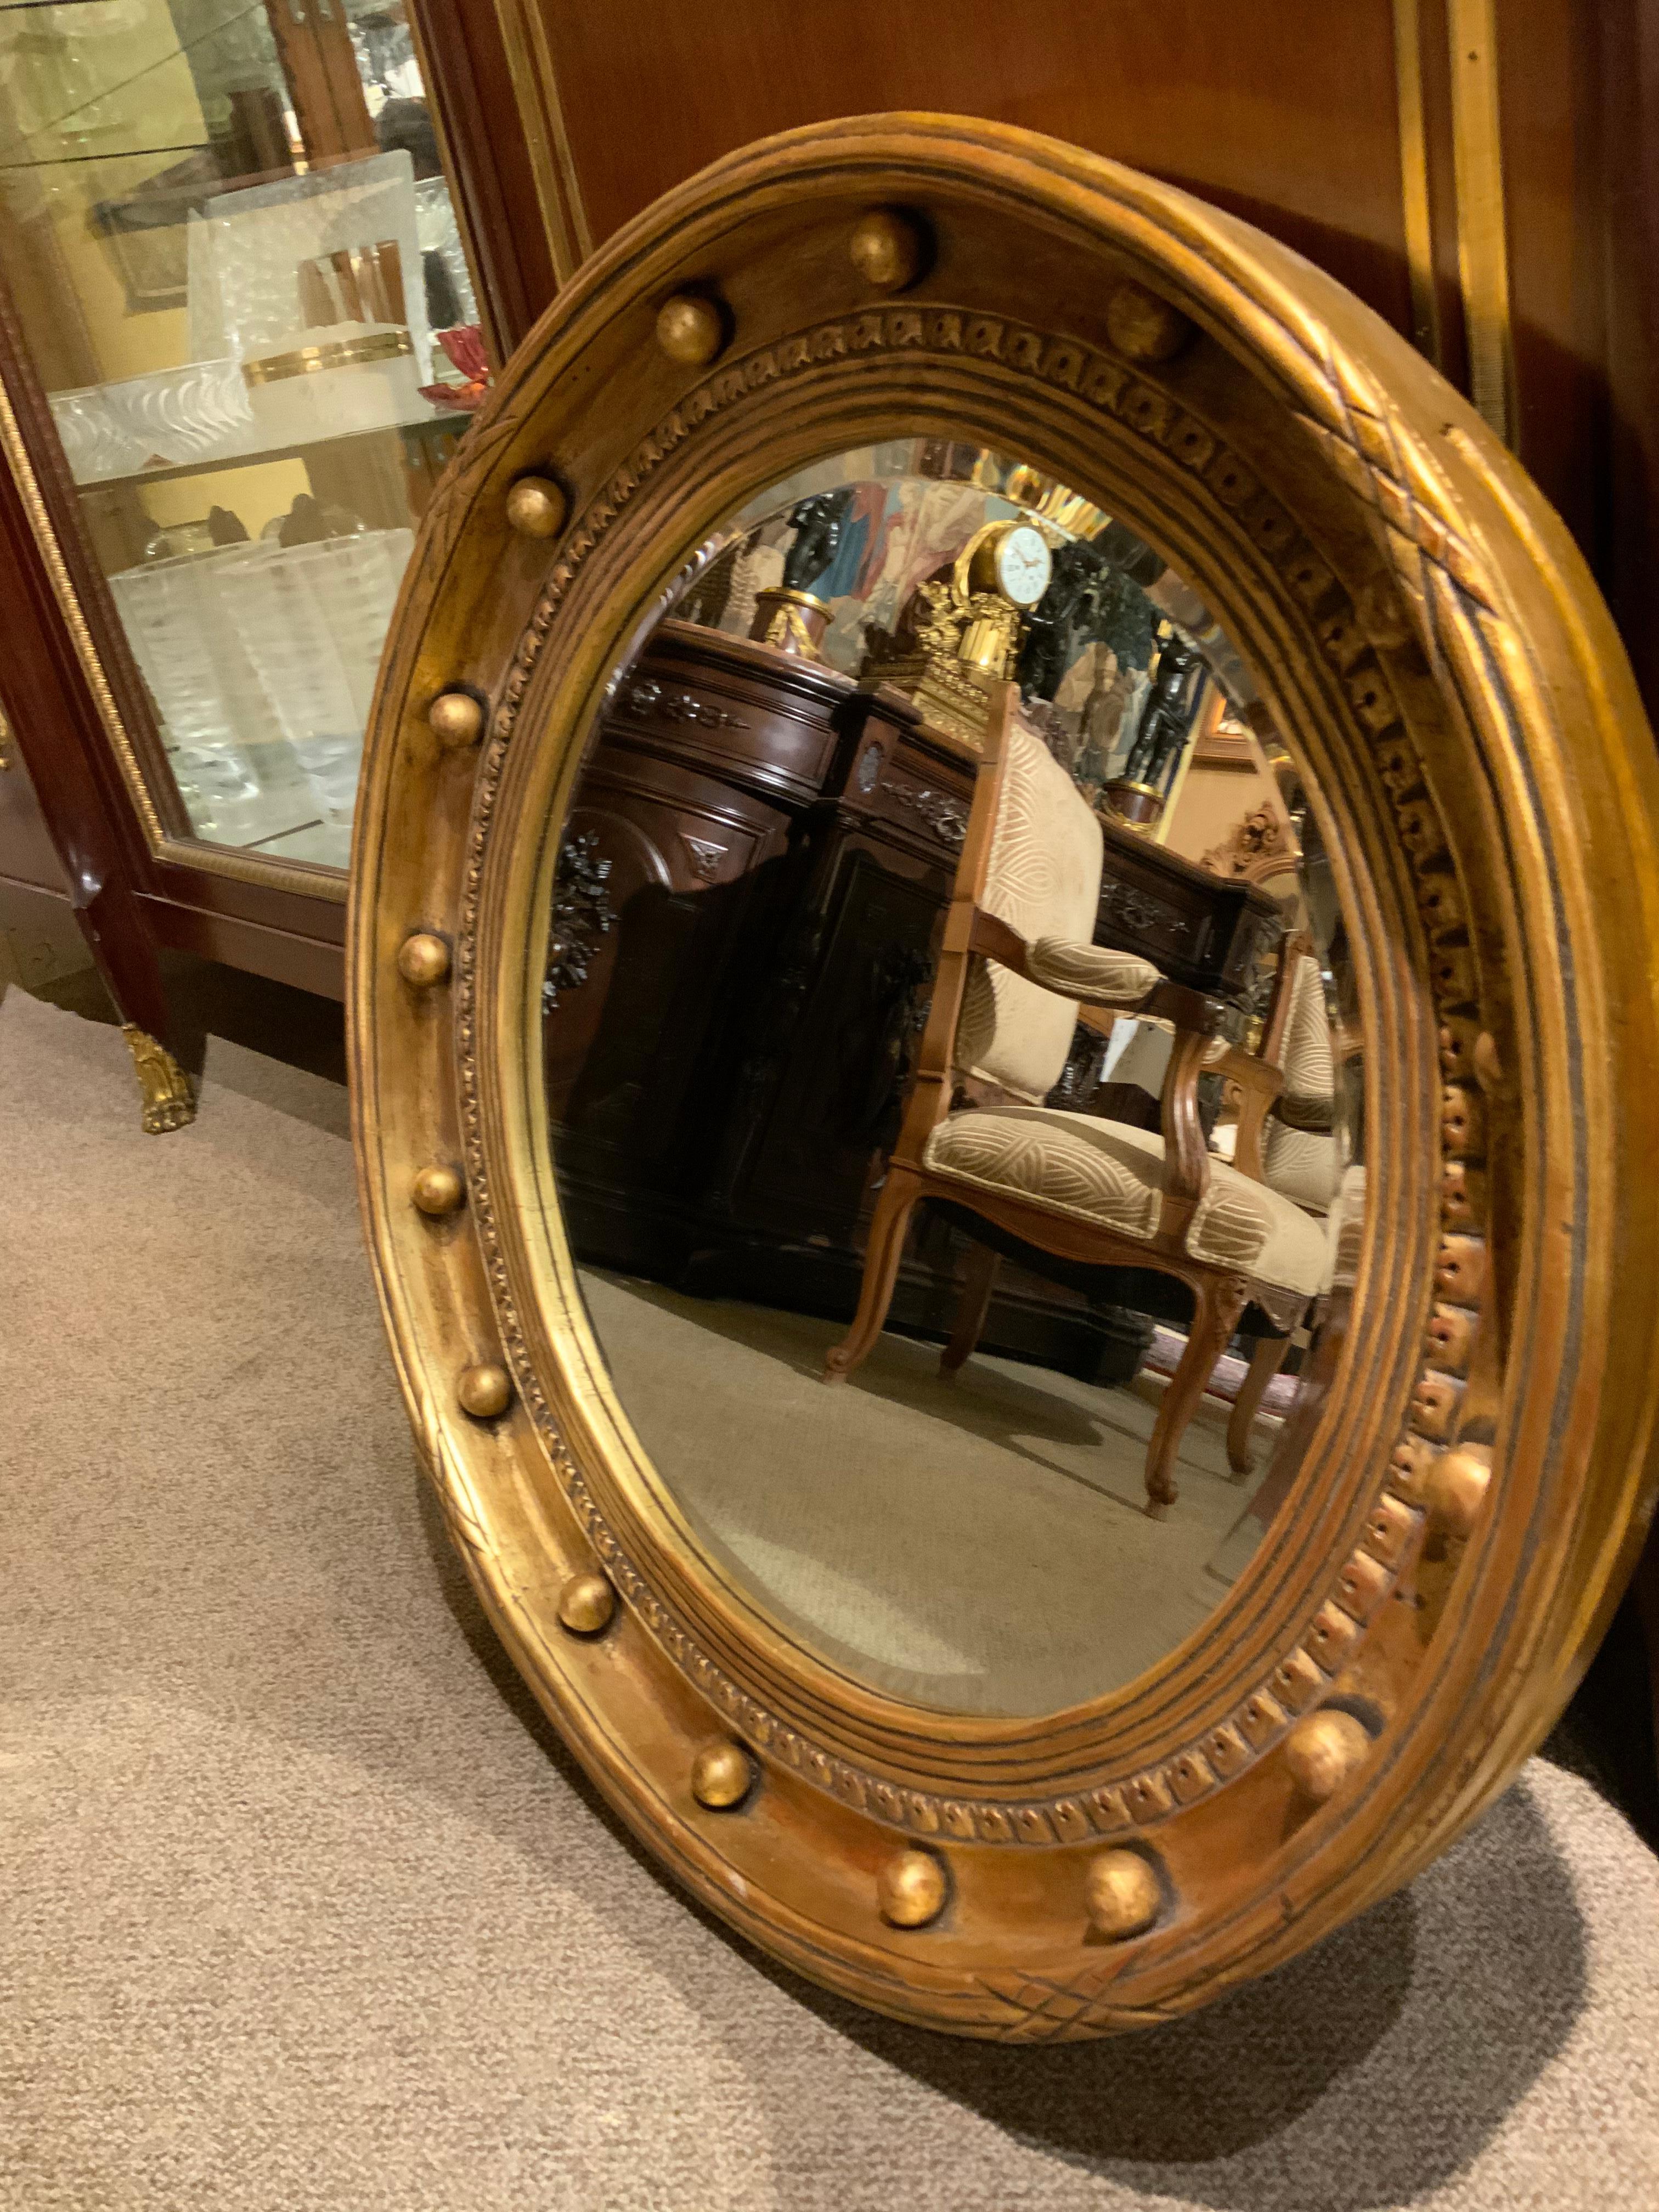 Circular giltwood frame with Grooved carved edge with a rim encircling the edge with
A round ball-like design. And a carved crown design within the inner edge holding
The mirror with a beveled mirror plate. A wire hanger makes this great piece